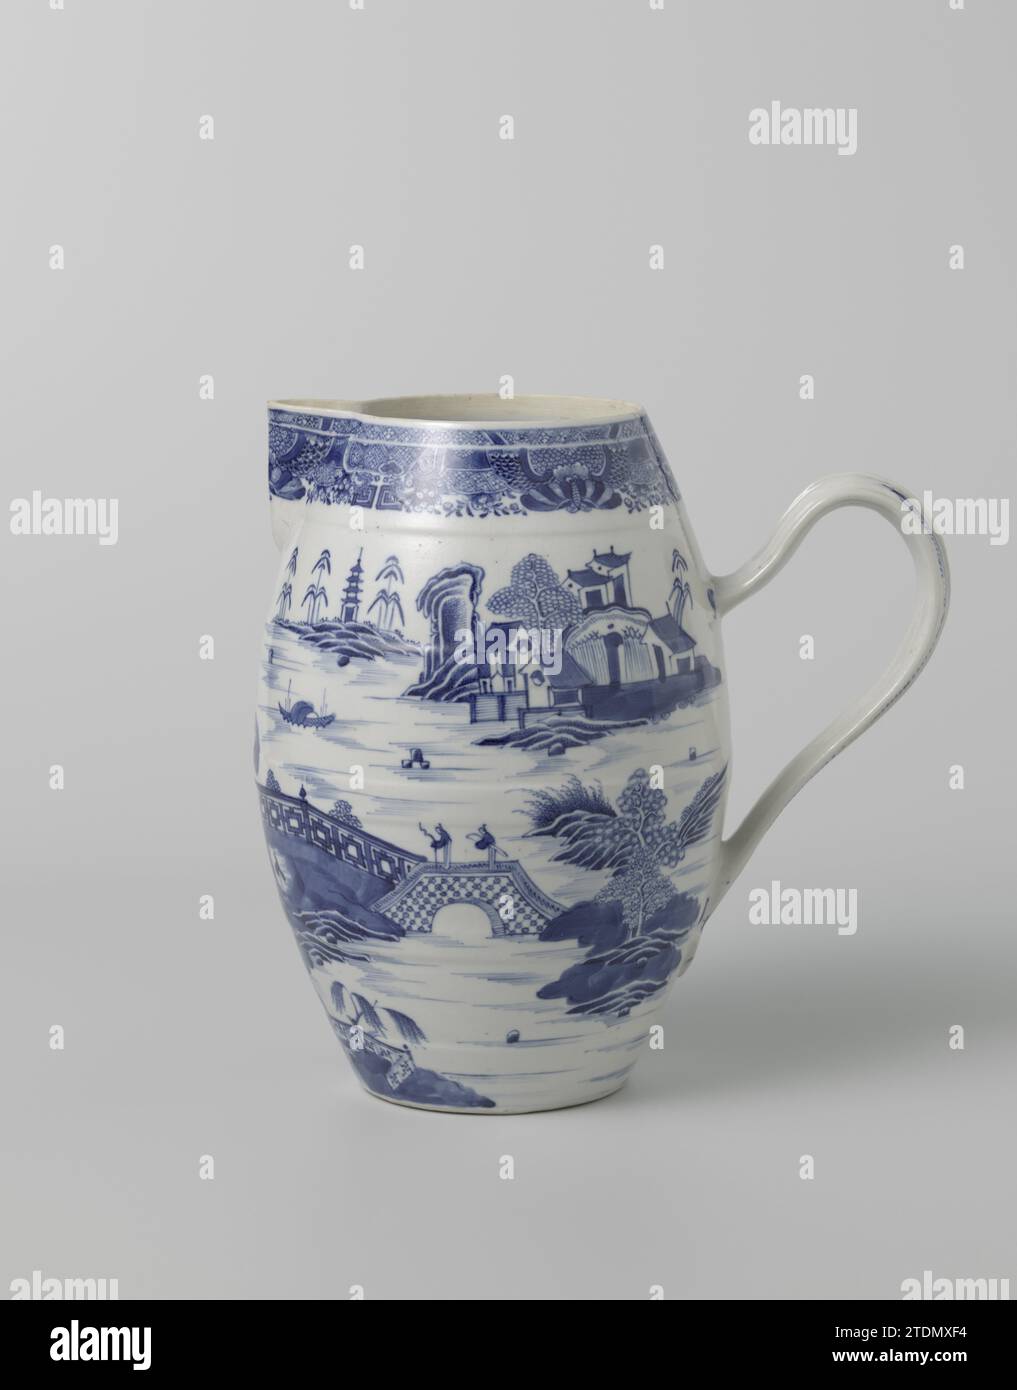 Pitcher with a riverlandscape with large pavilion and figures, c. 1800 - c. 1824 Can be made of porcelain with a barrel -shaped abdomen, triangular spout from the edge and ear, painted in underlaze blue. On the wall of the Kan a continuous river landscape with pavilions, mountains, trees, people and a boat; the edge with Fitzhugh band; A slender on the ear. Bijhehoor lid has number AK-NM-6944-A. Blue White. China porcelain. glaze. cobalt (mineral) painting / vitrification Can be made of porcelain with a barrel -shaped abdomen, triangular spout from the edge and ear, painted in underlaze blue. Stock Photo